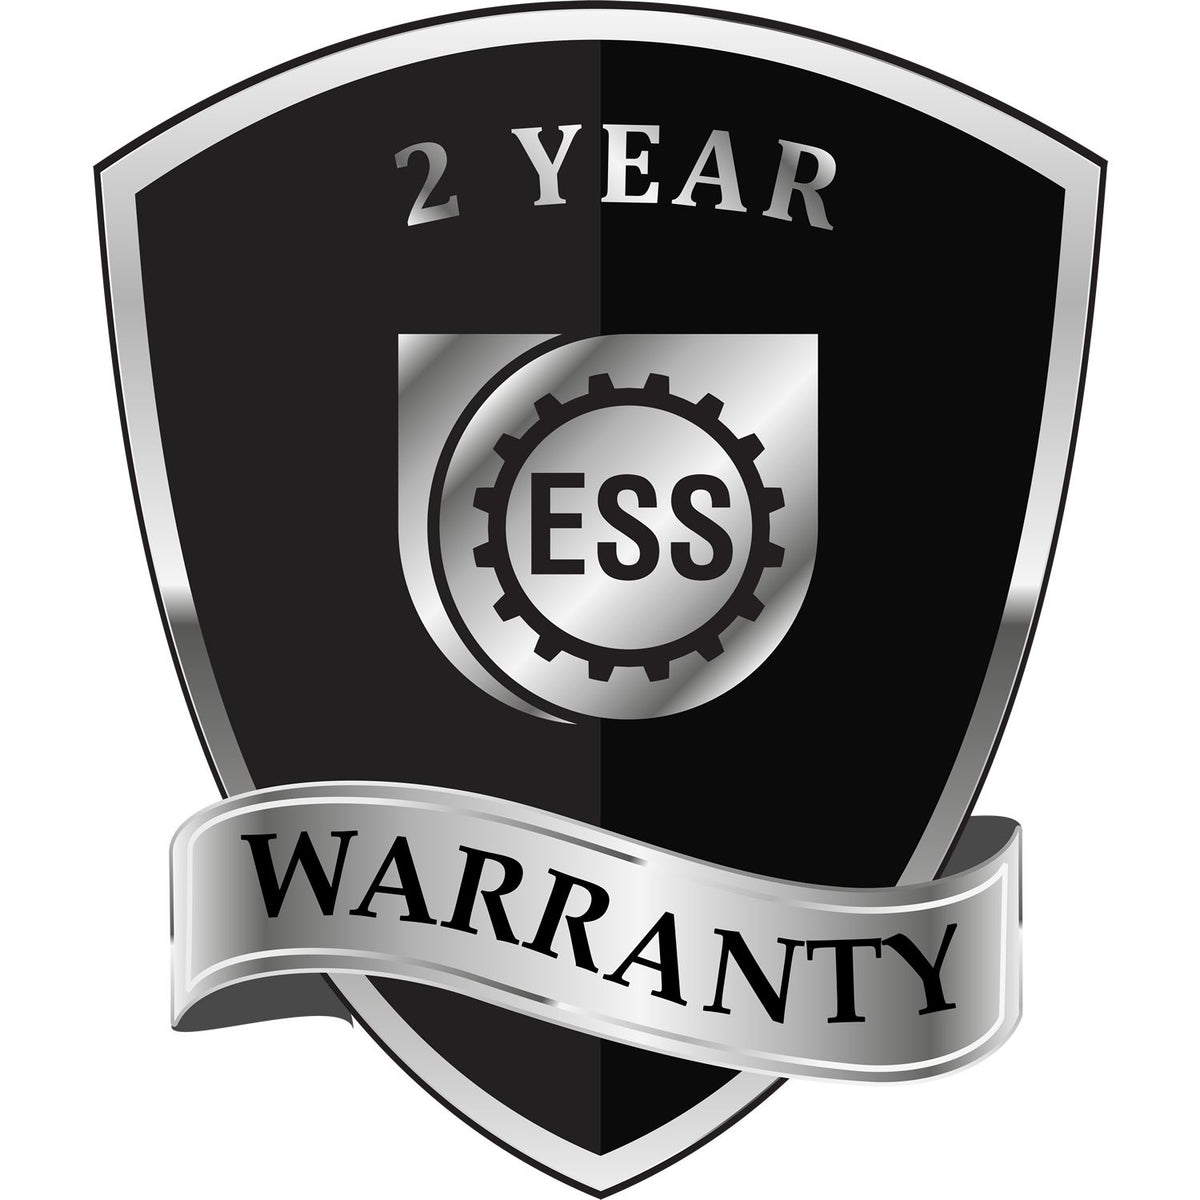 A black and silver badge or emblem showing warranty information for the Gift Texas Landscape Architect Seal